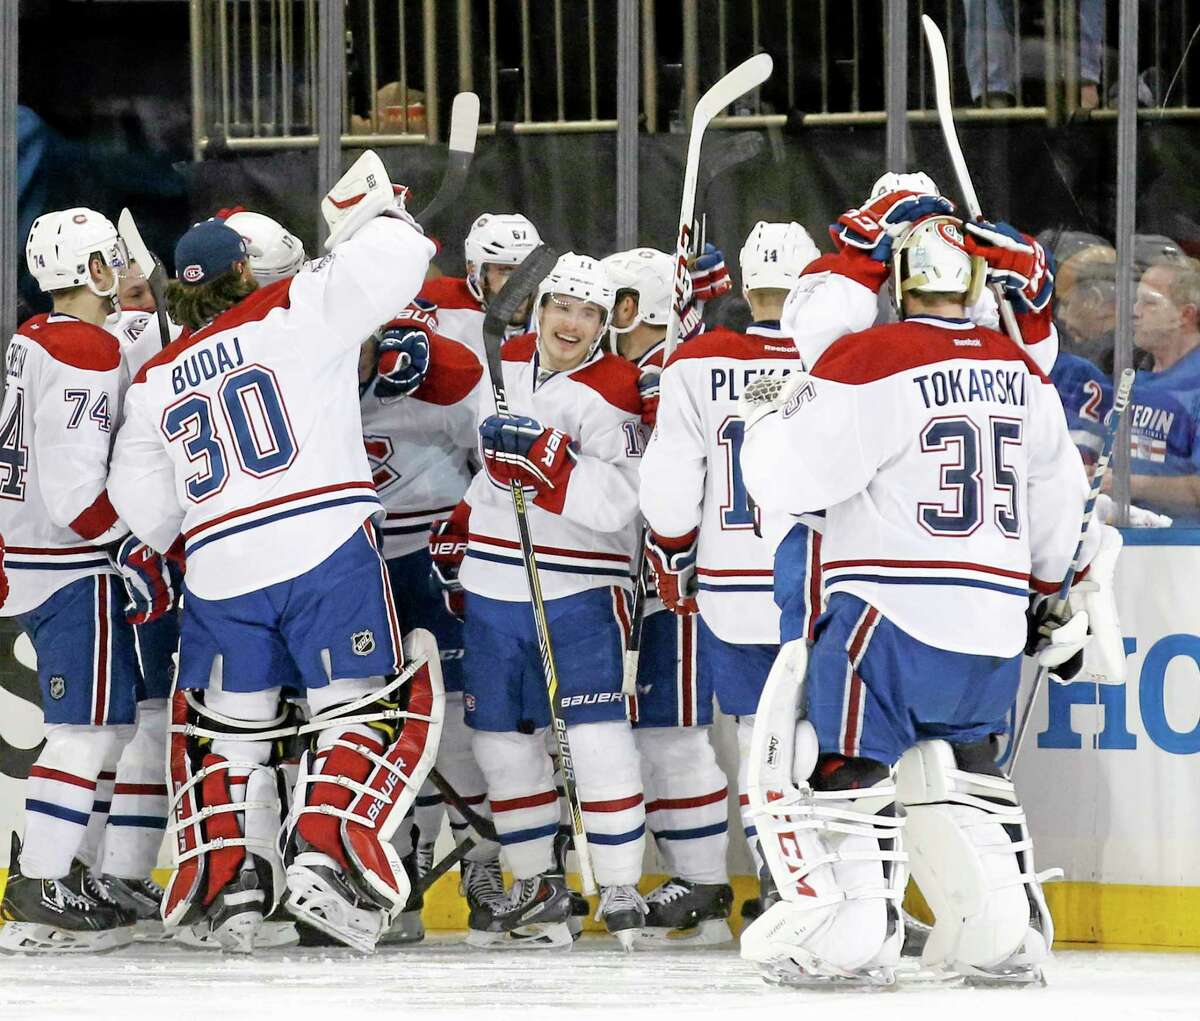 The Montreal Canadiens celebrate after defeating the New York Rangers 3-2 in overtime in Game 3 of the Stanley Cup playoffs Eastern Conference finals.